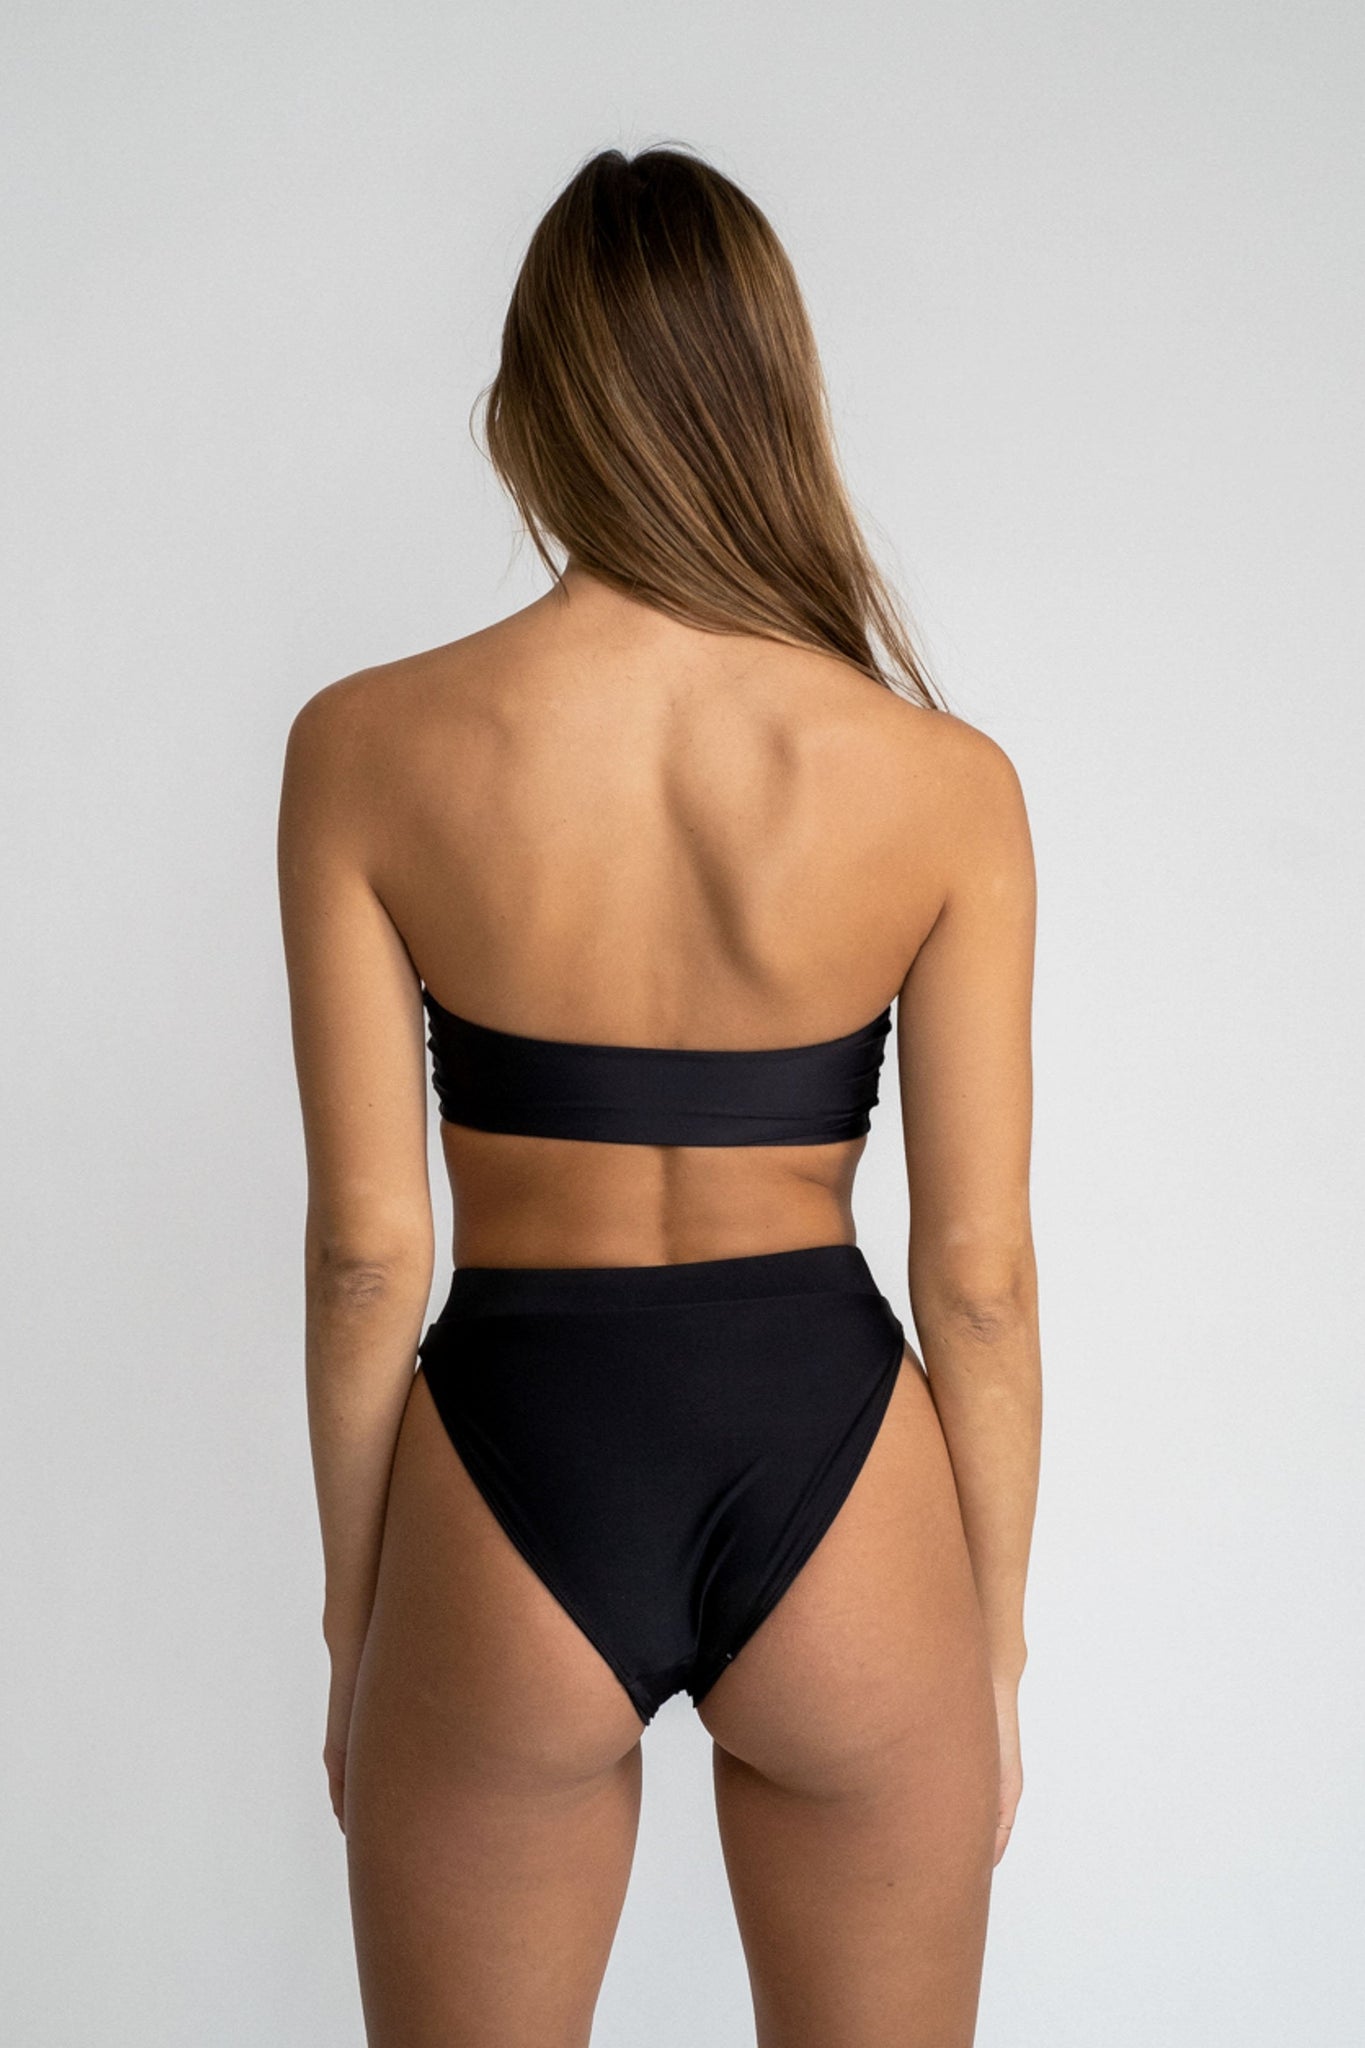 The back of a woman standing in front of a white wall wearing black high waisted bikini bottoms with a matching black strapless bandeau top.